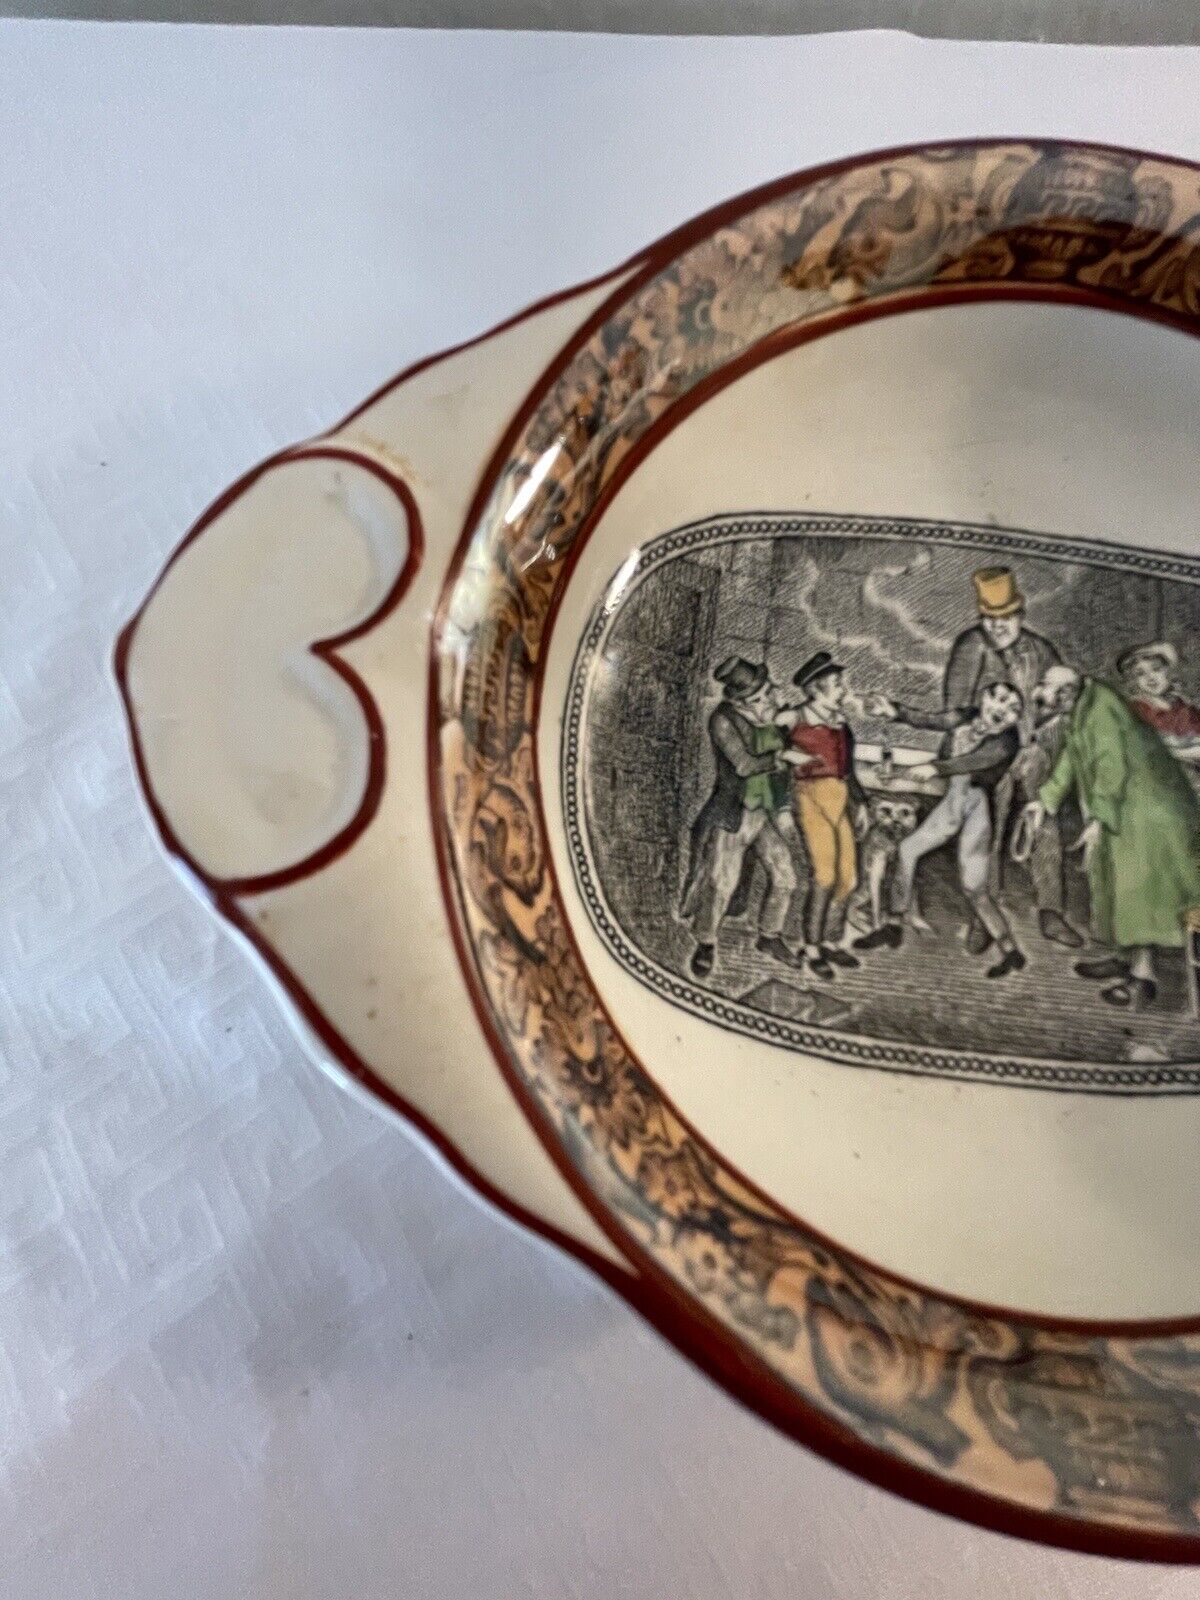 Adams Ironstone Dish Dickens “Oliver’s Reception” by Fagin & the Boys